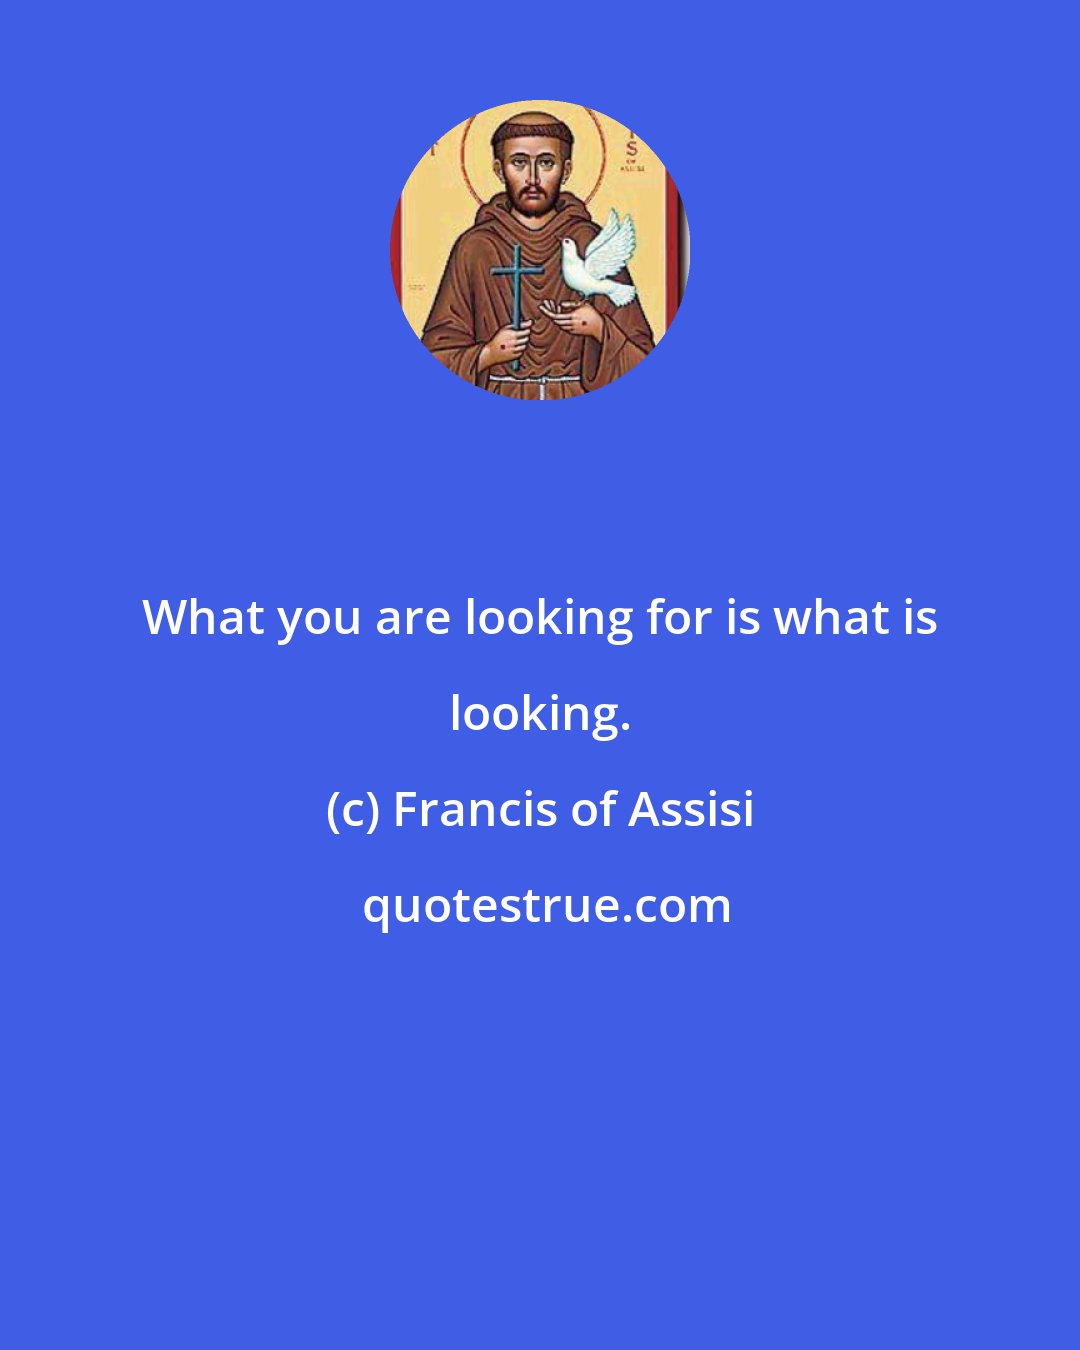 Francis of Assisi: What you are looking for is what is looking.